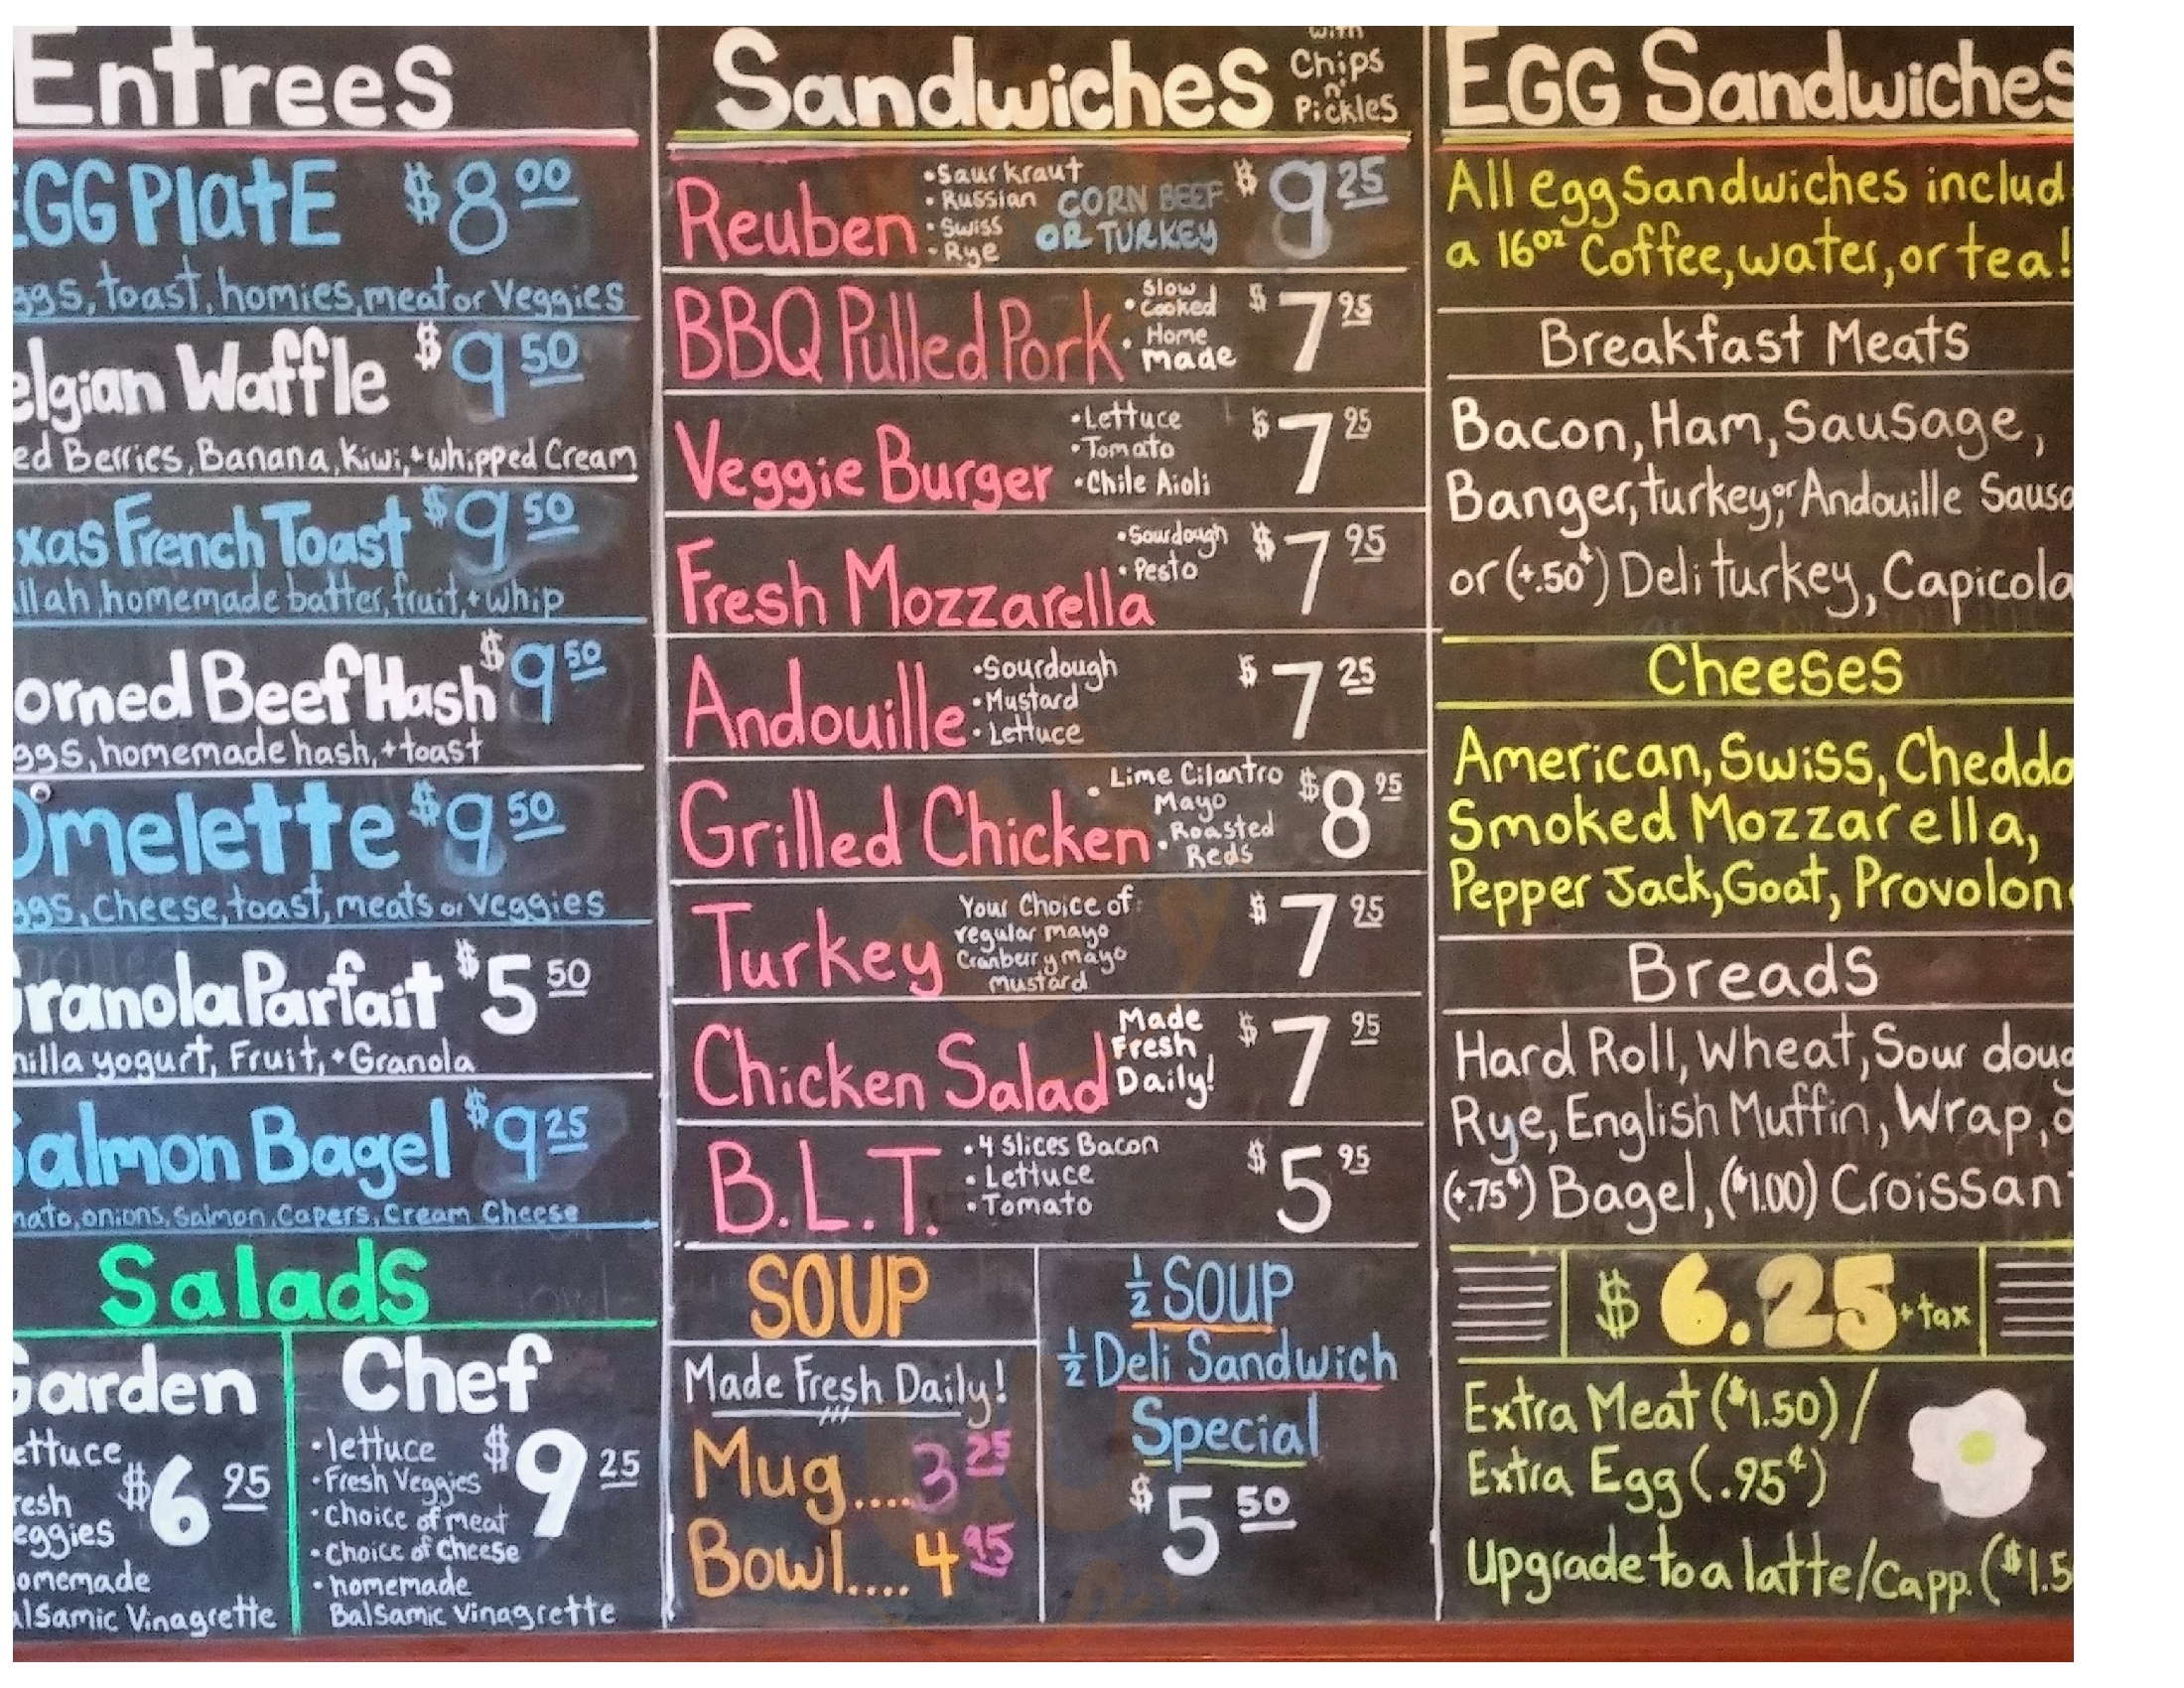 Daily Grind Cafe Albany Menu - 1